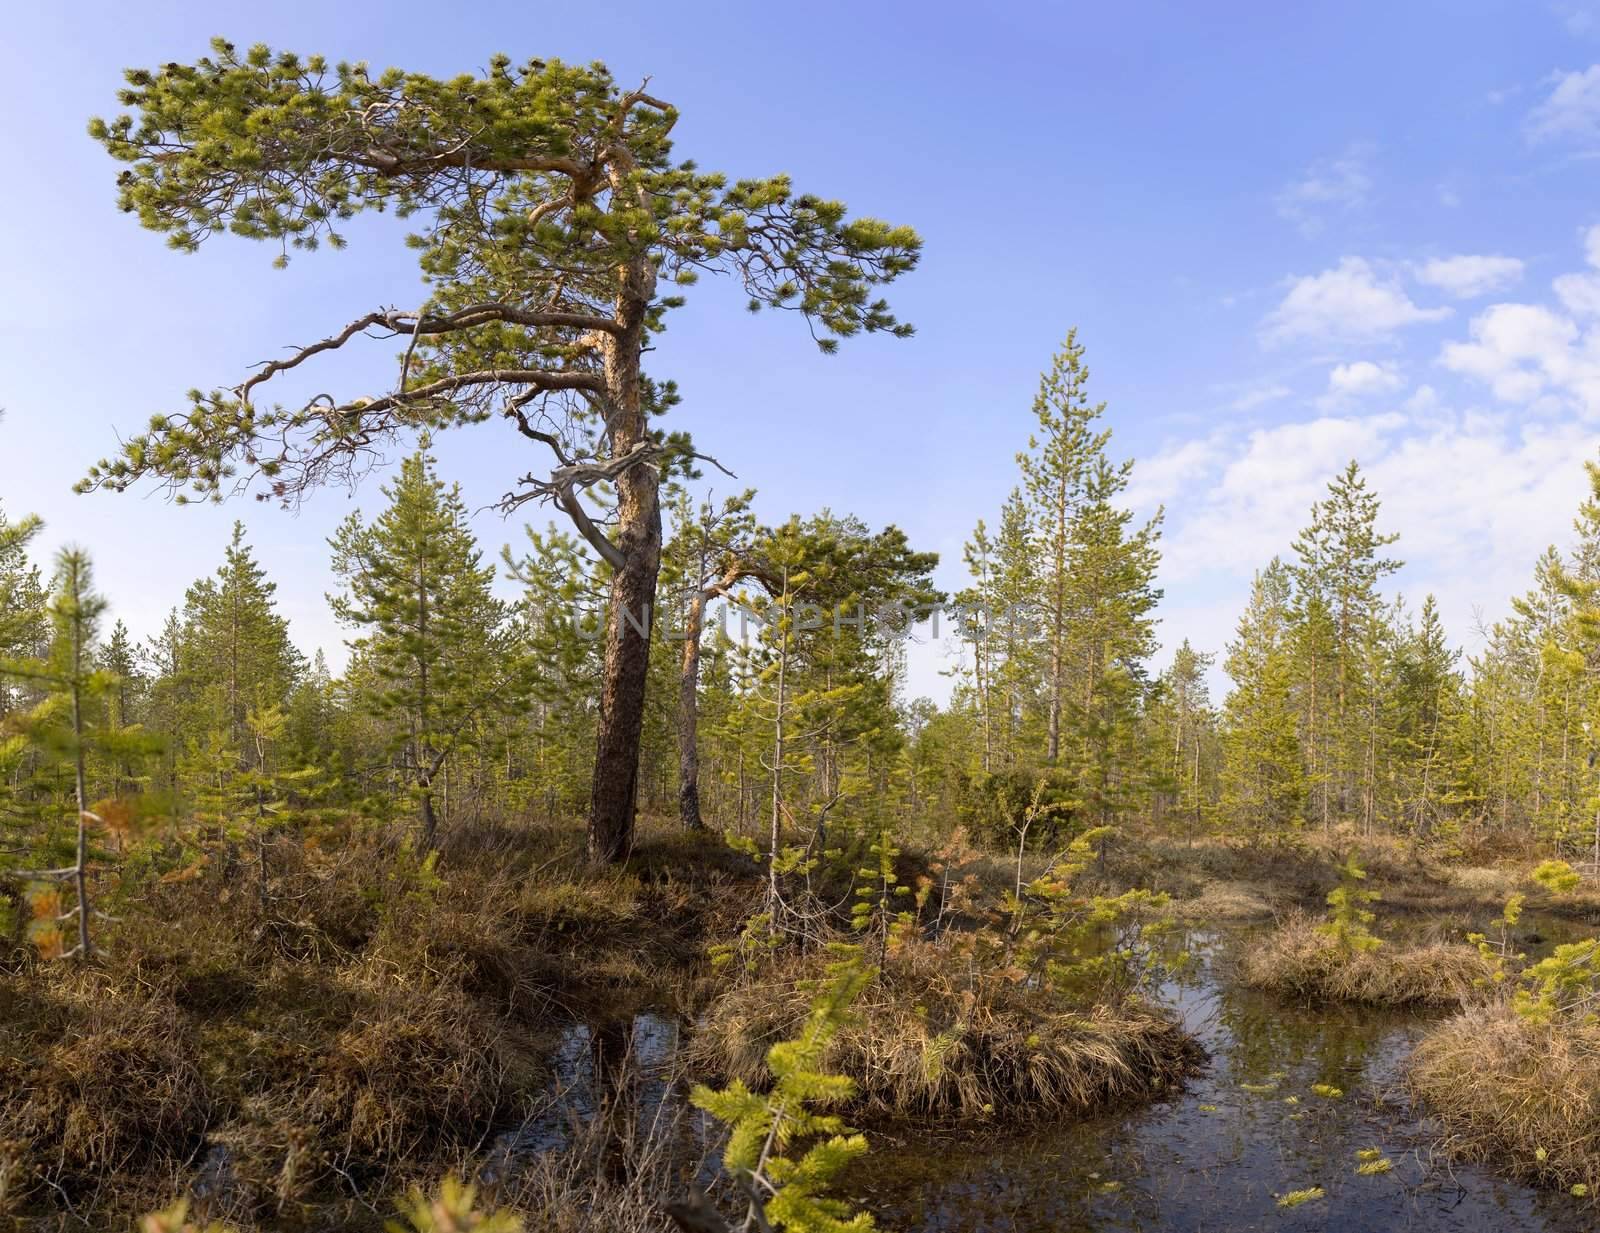 The pine among bog by pzaxe